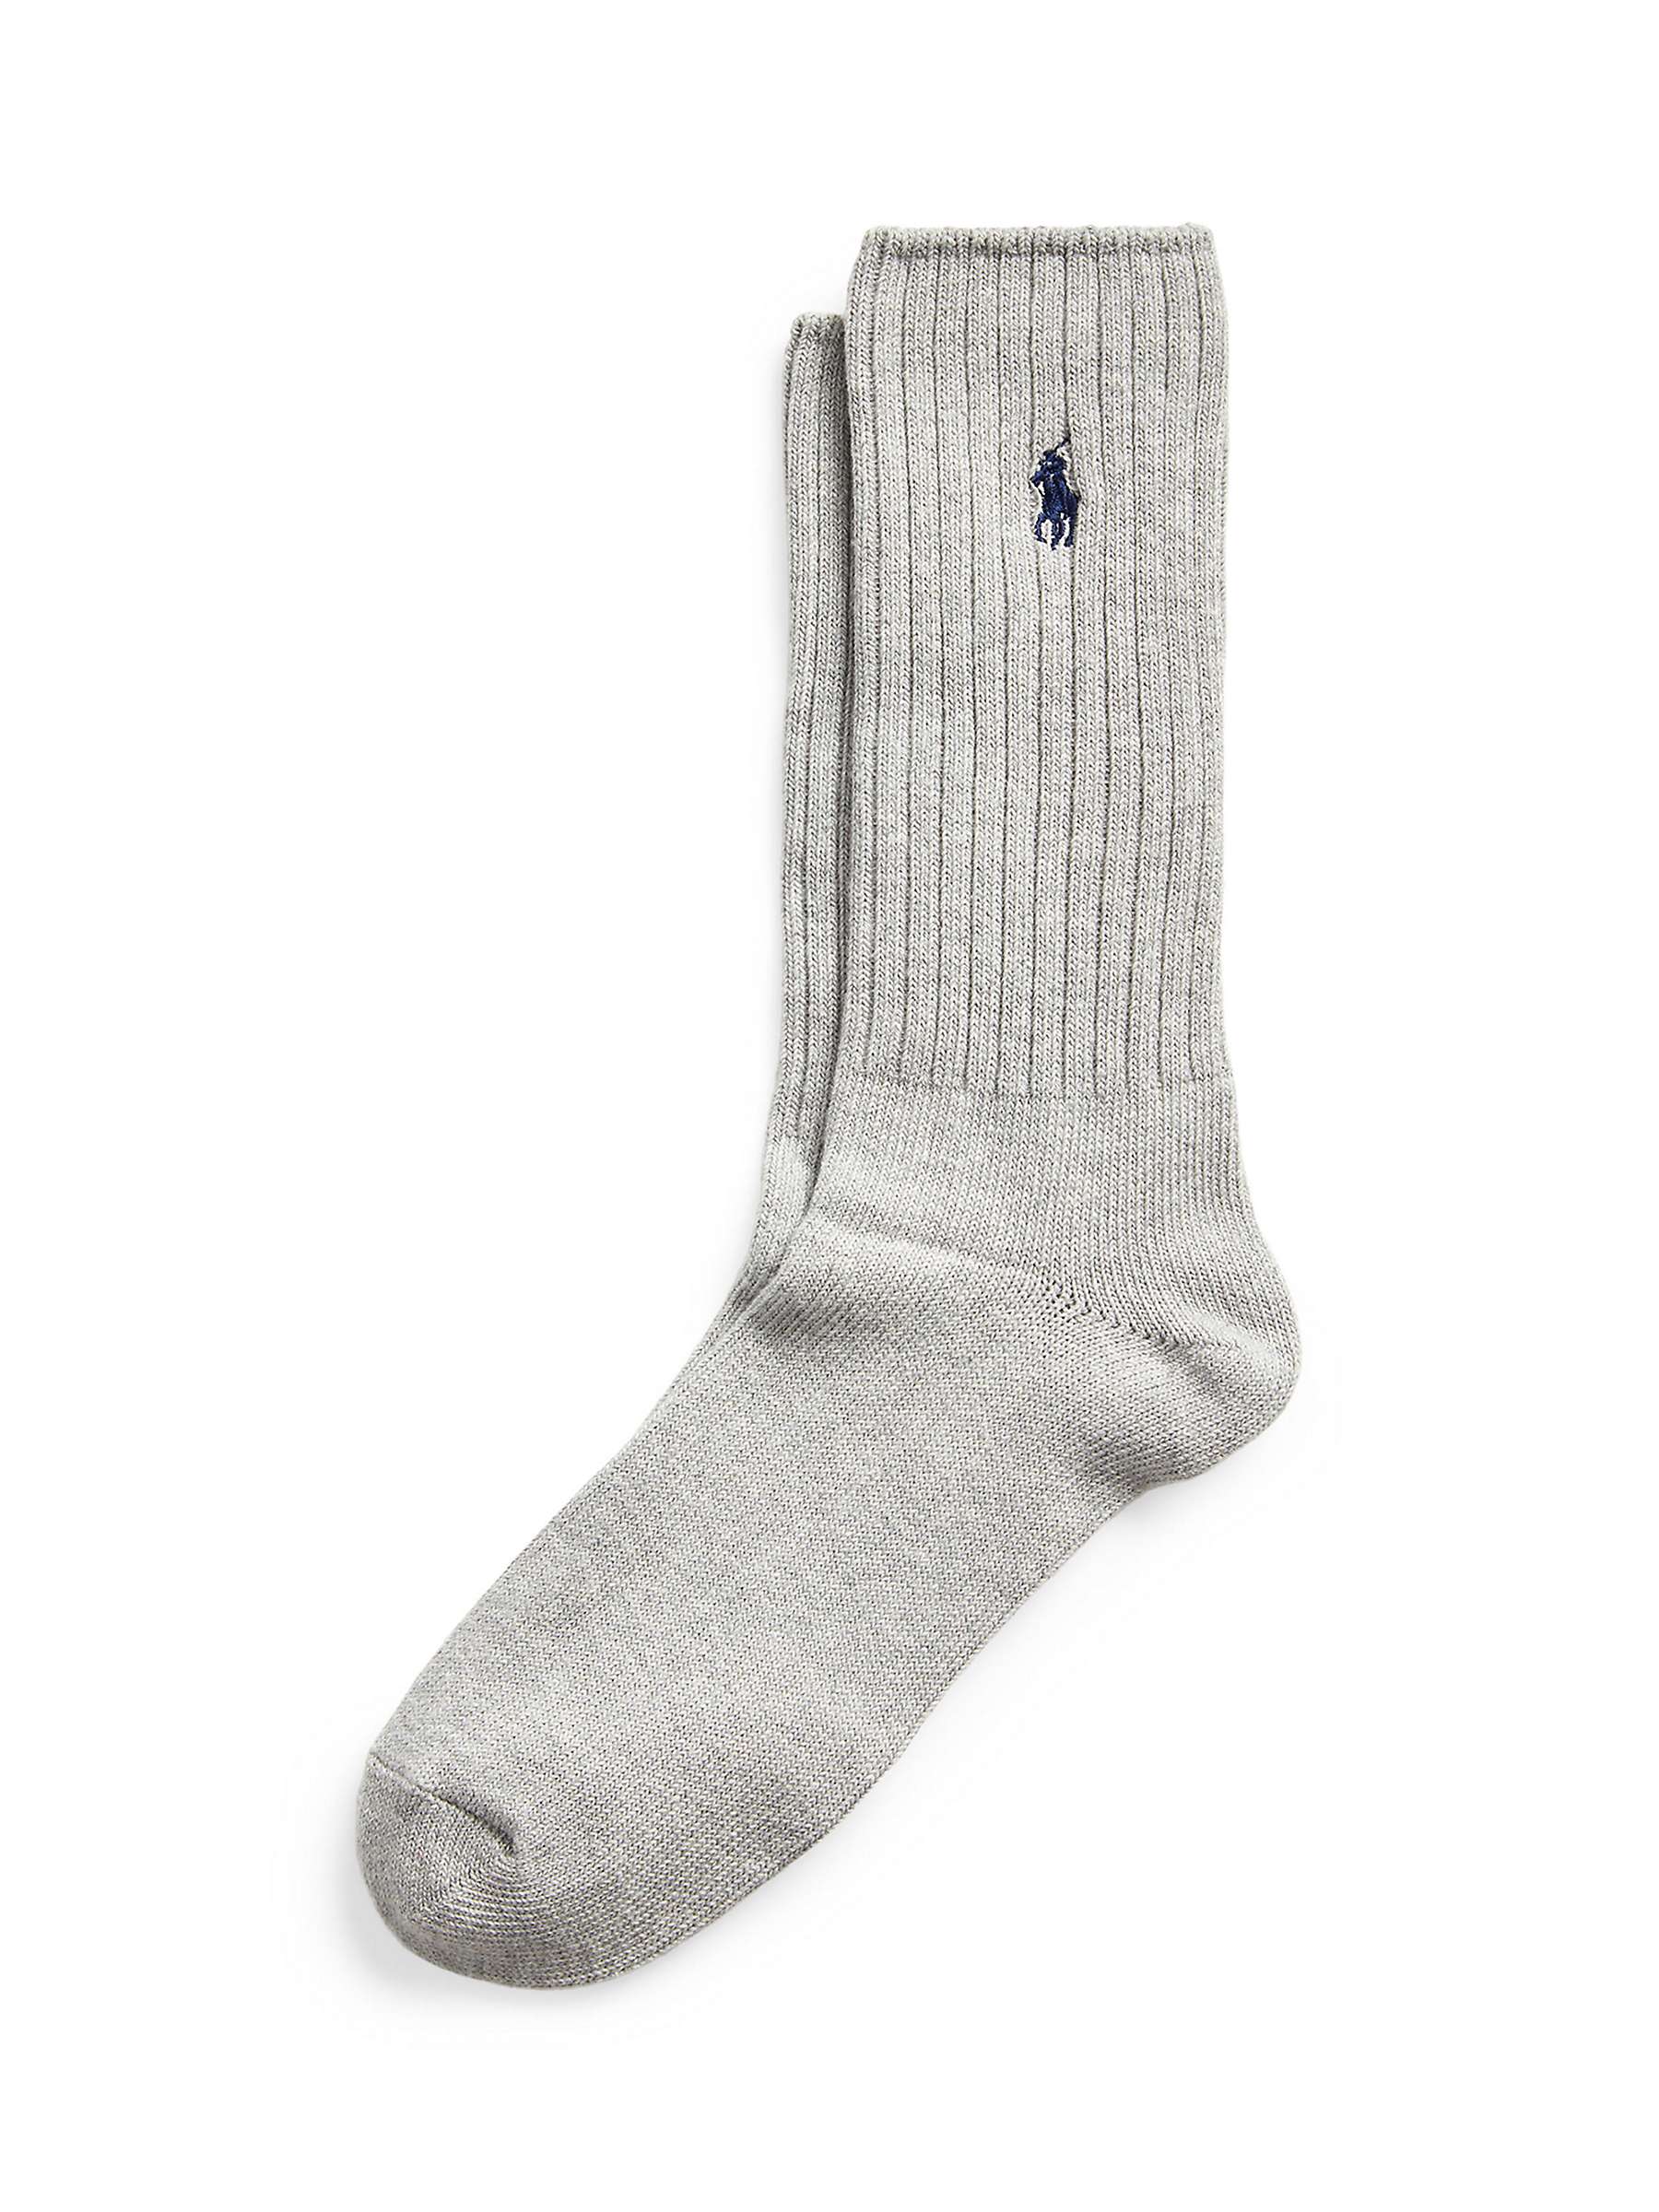 Buy Polo Ralph Lauren Ribbed Cotton Socks, One Size, Grey Online at johnlewis.com